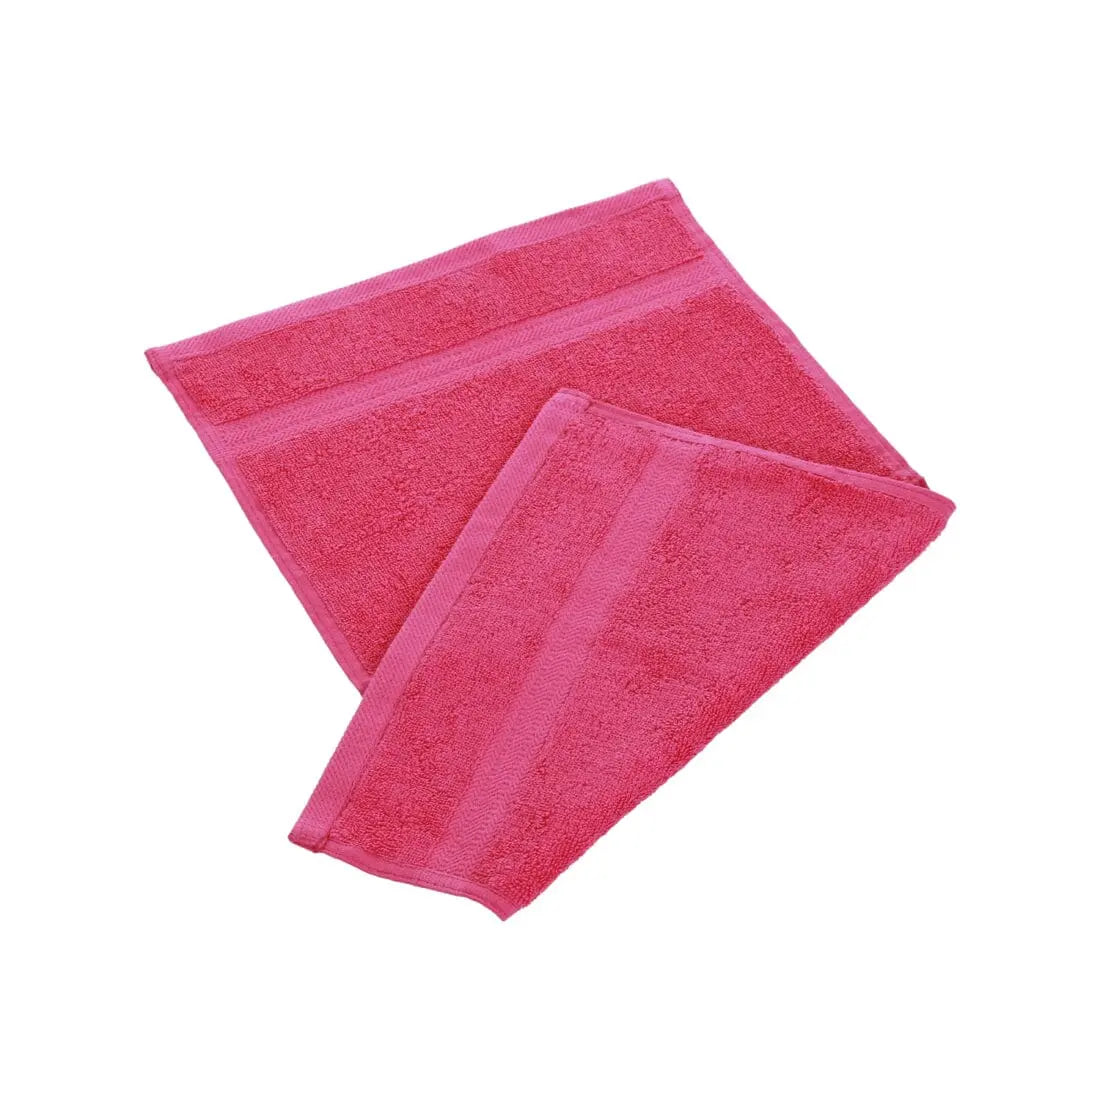 Pink egyptian cotton towel ideal for the gym